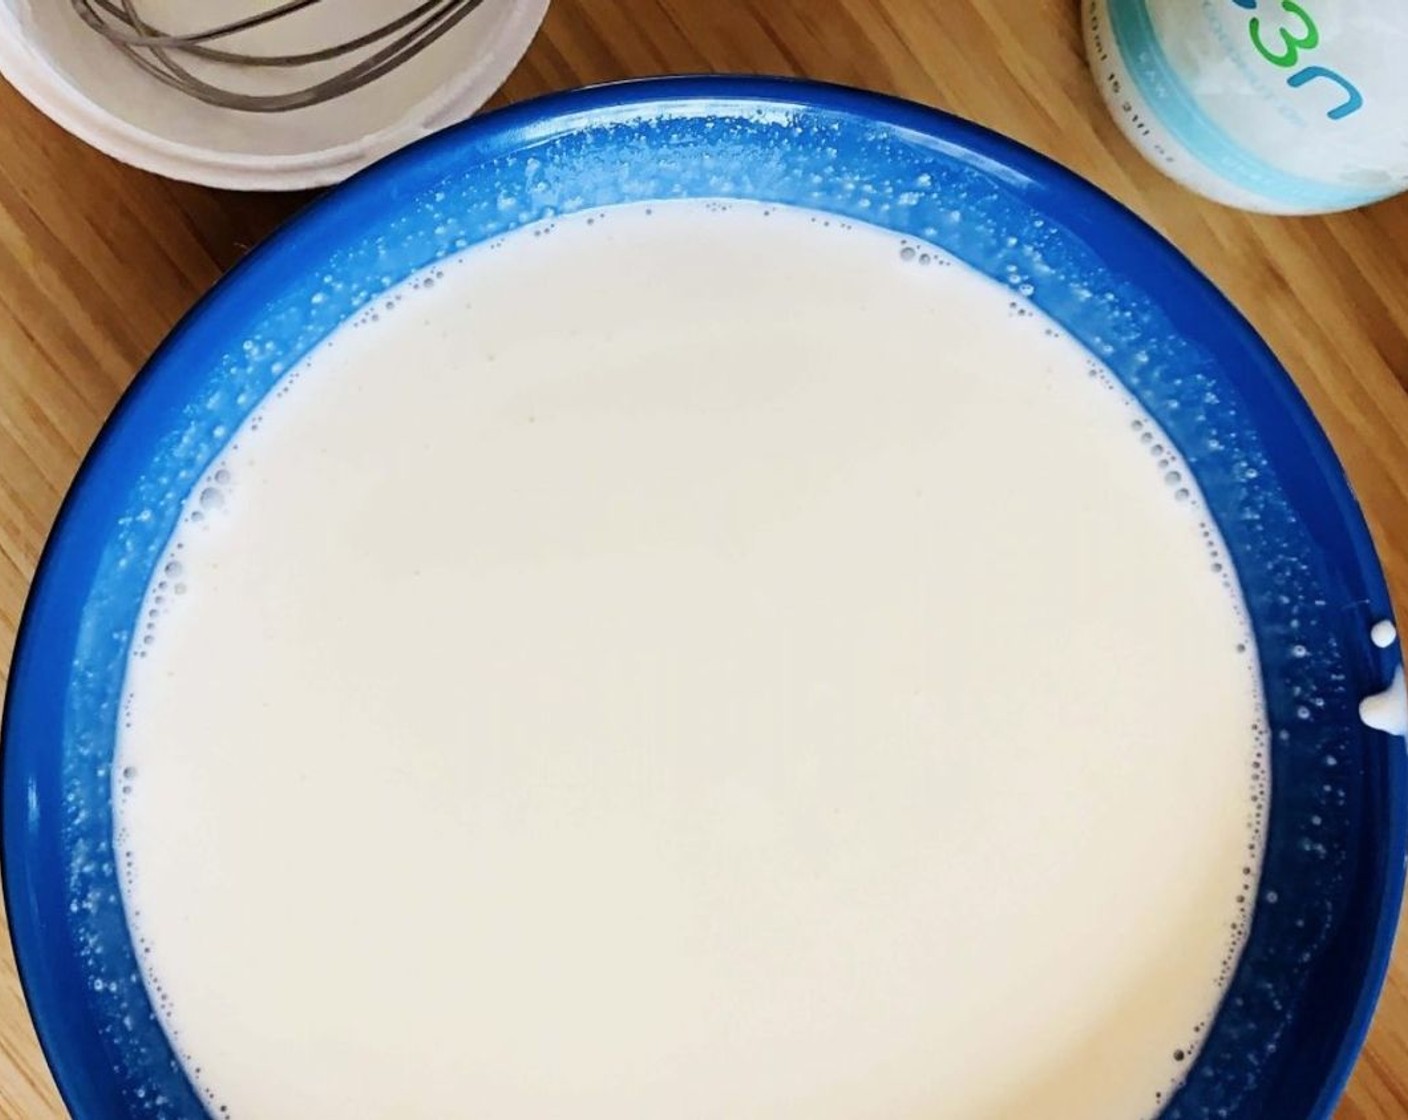 step 6 In a large bowl, stir together Greek Yogurt (1 1/4 cups), La Lechera® Sweetened Condensed Milk (2/3 cup), and Fresh Cream (2/3 cup) until well combined.